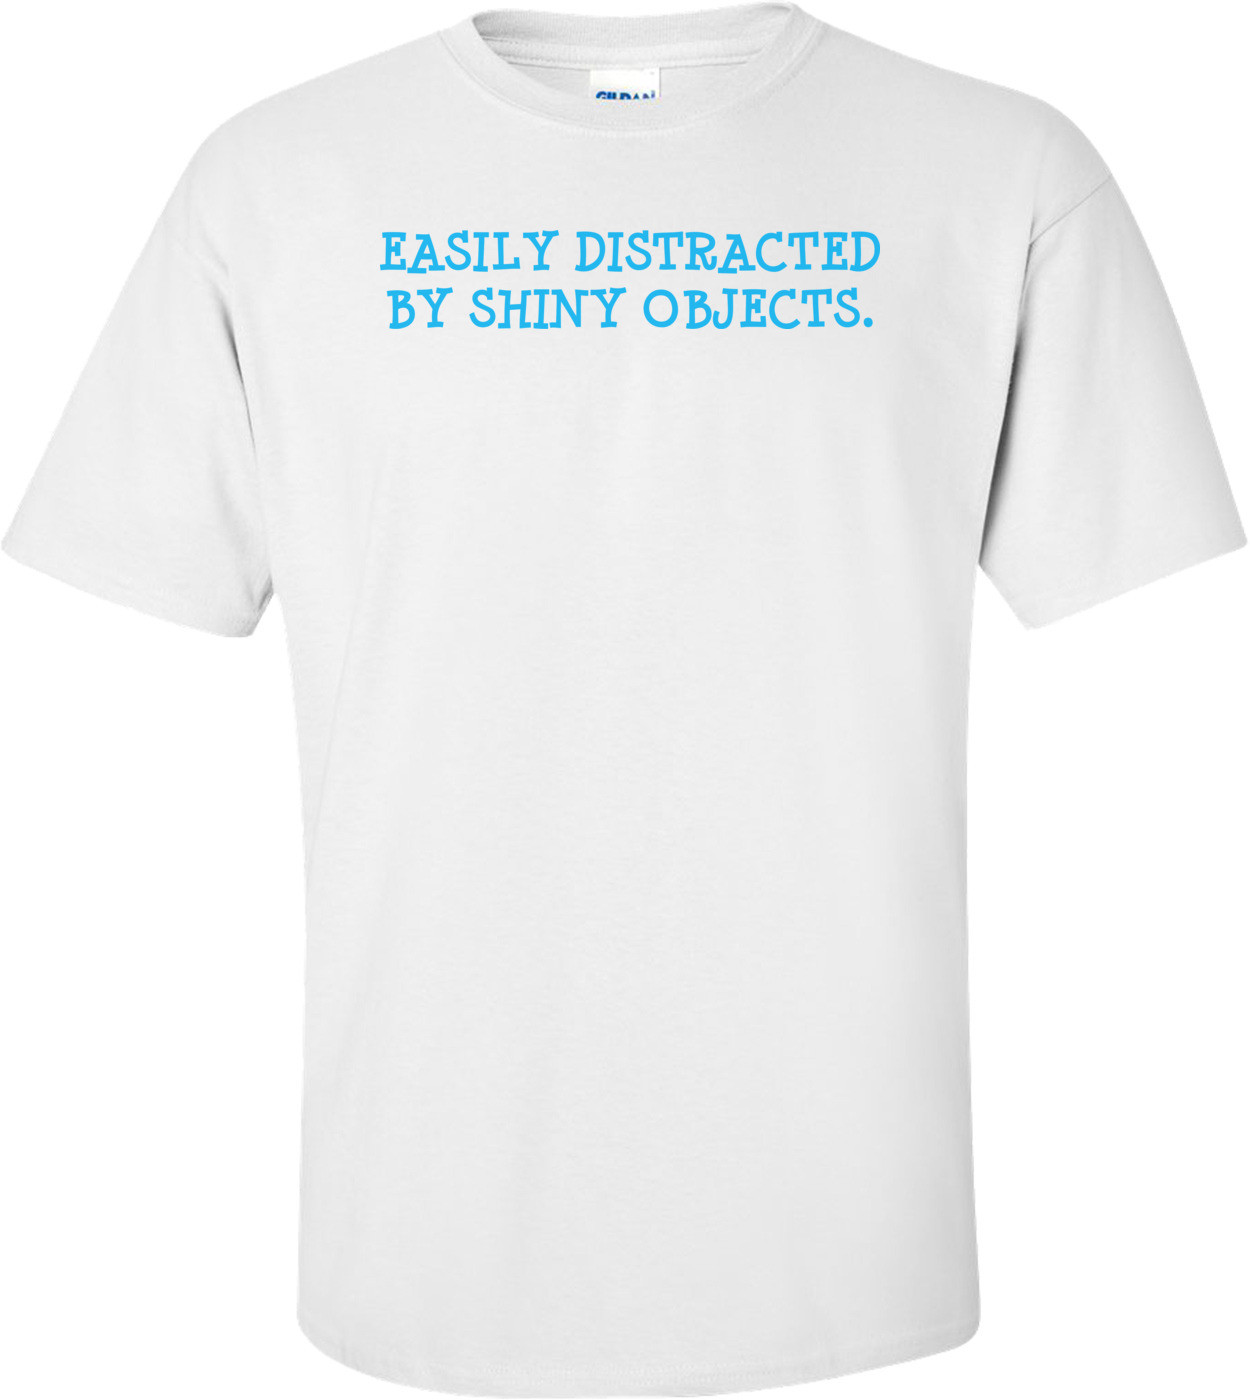 Easily Distracted By Shiny Objects T-shirt